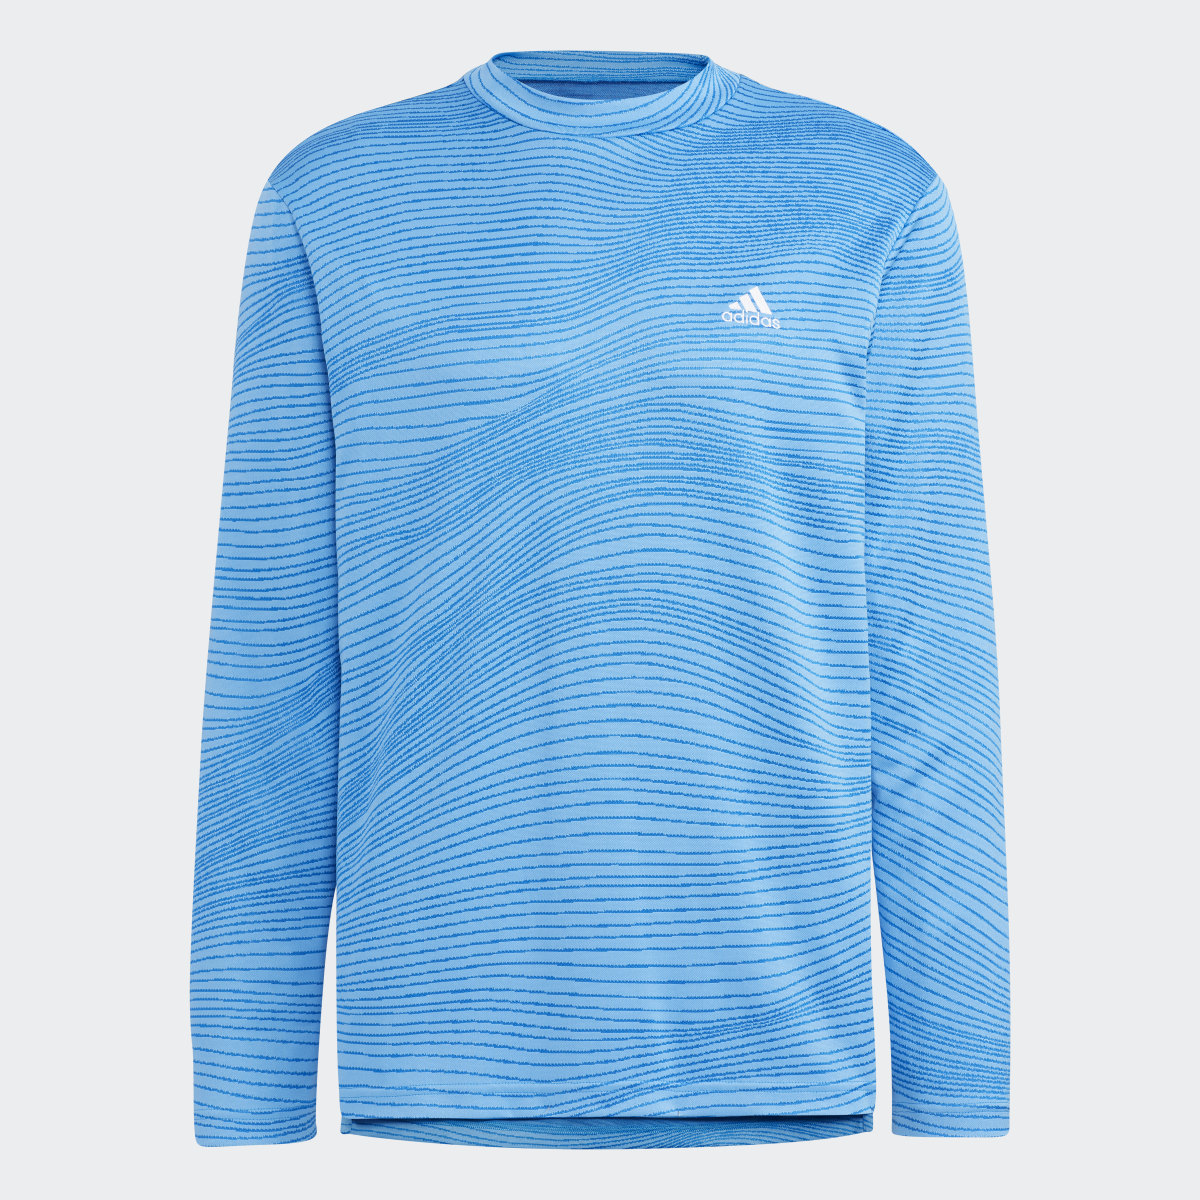 Adidas Made to be Remade Mock Neck Long Sleeve Shirt. 5